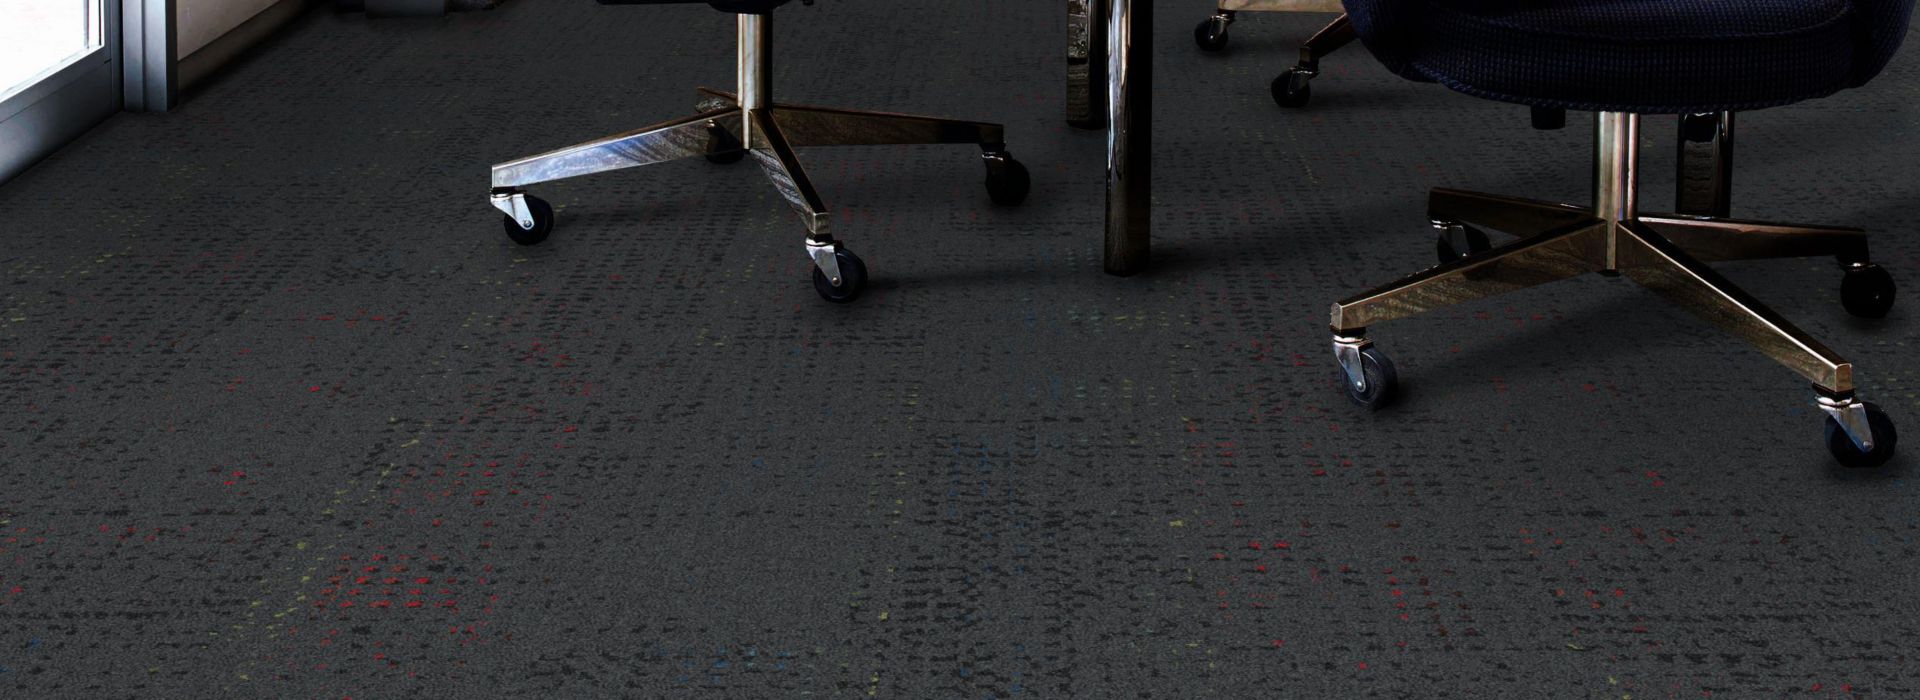 Interface Speckled plank carpet tile in private office image number 1